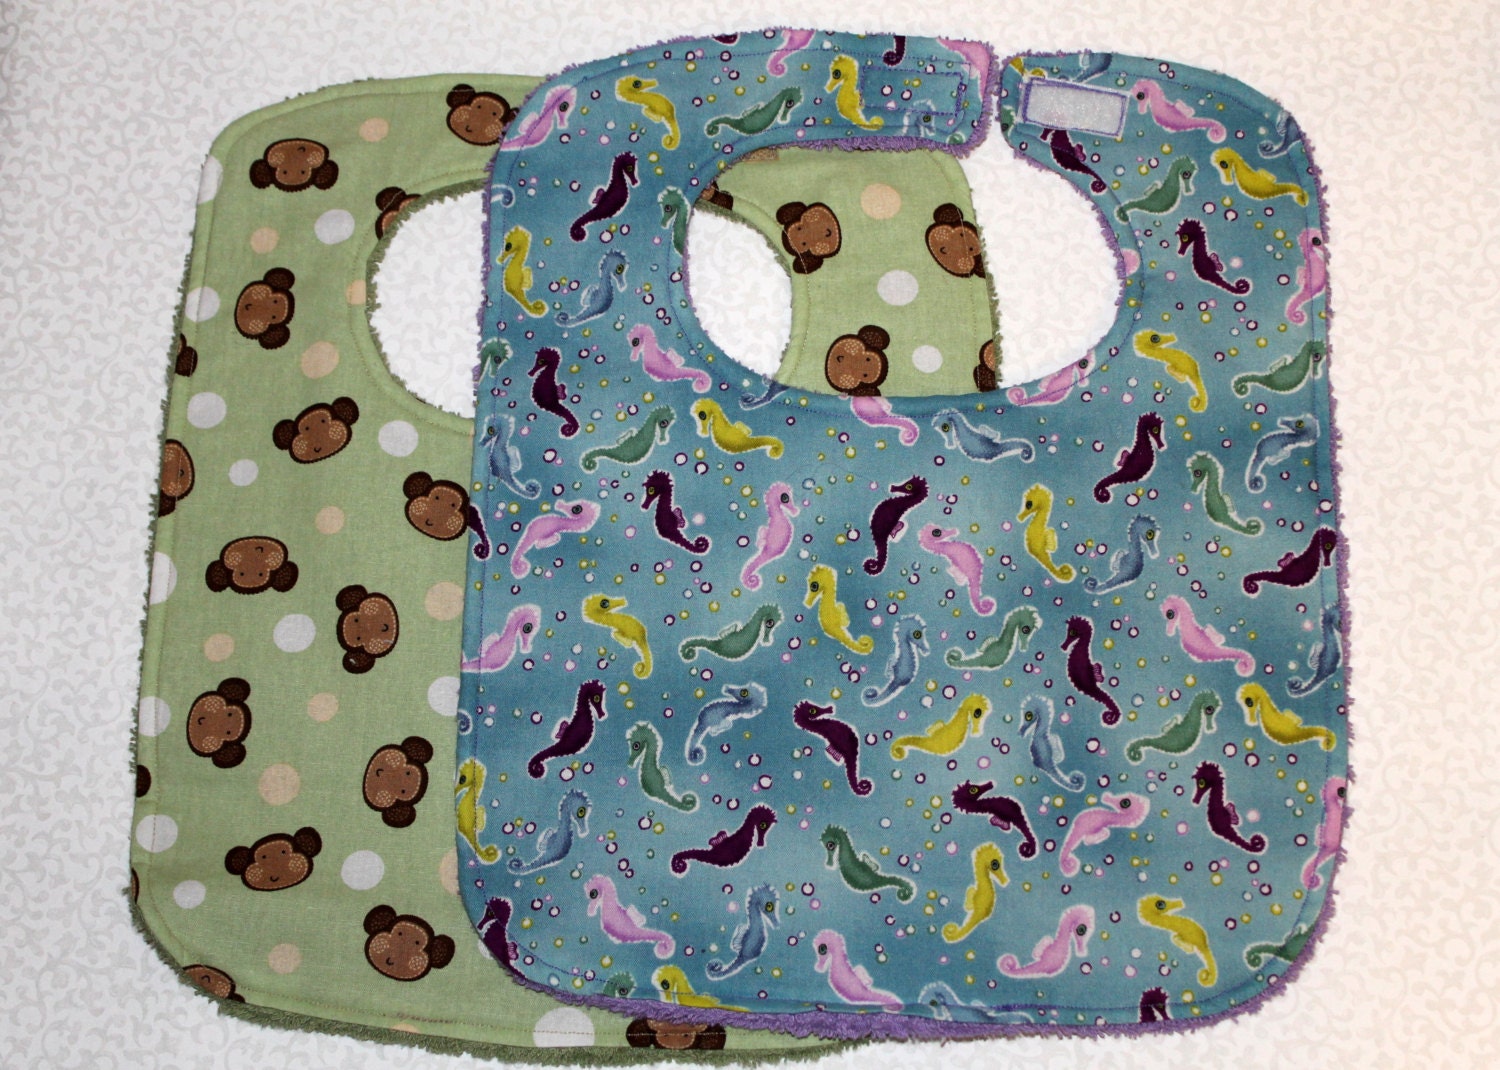 Baby/Toddler Bib Set of Two - Monkey Bib and Seahorse Bib - Cotton and Terry Cloth  - Gender Neutral - Oceanlvrcrafts